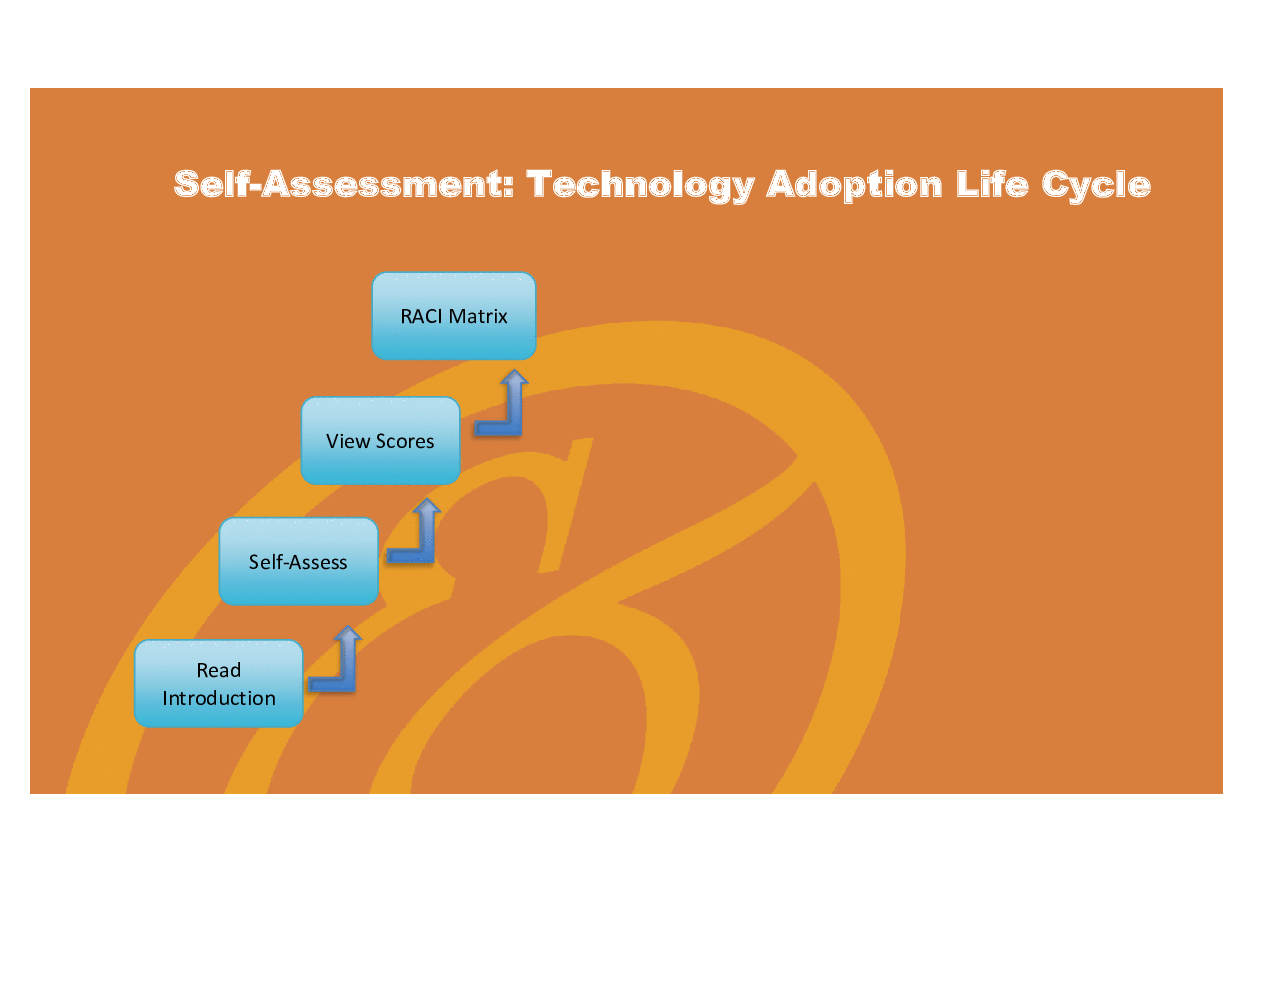 Technology Adoption Life Cycle - Implementation Toolkit